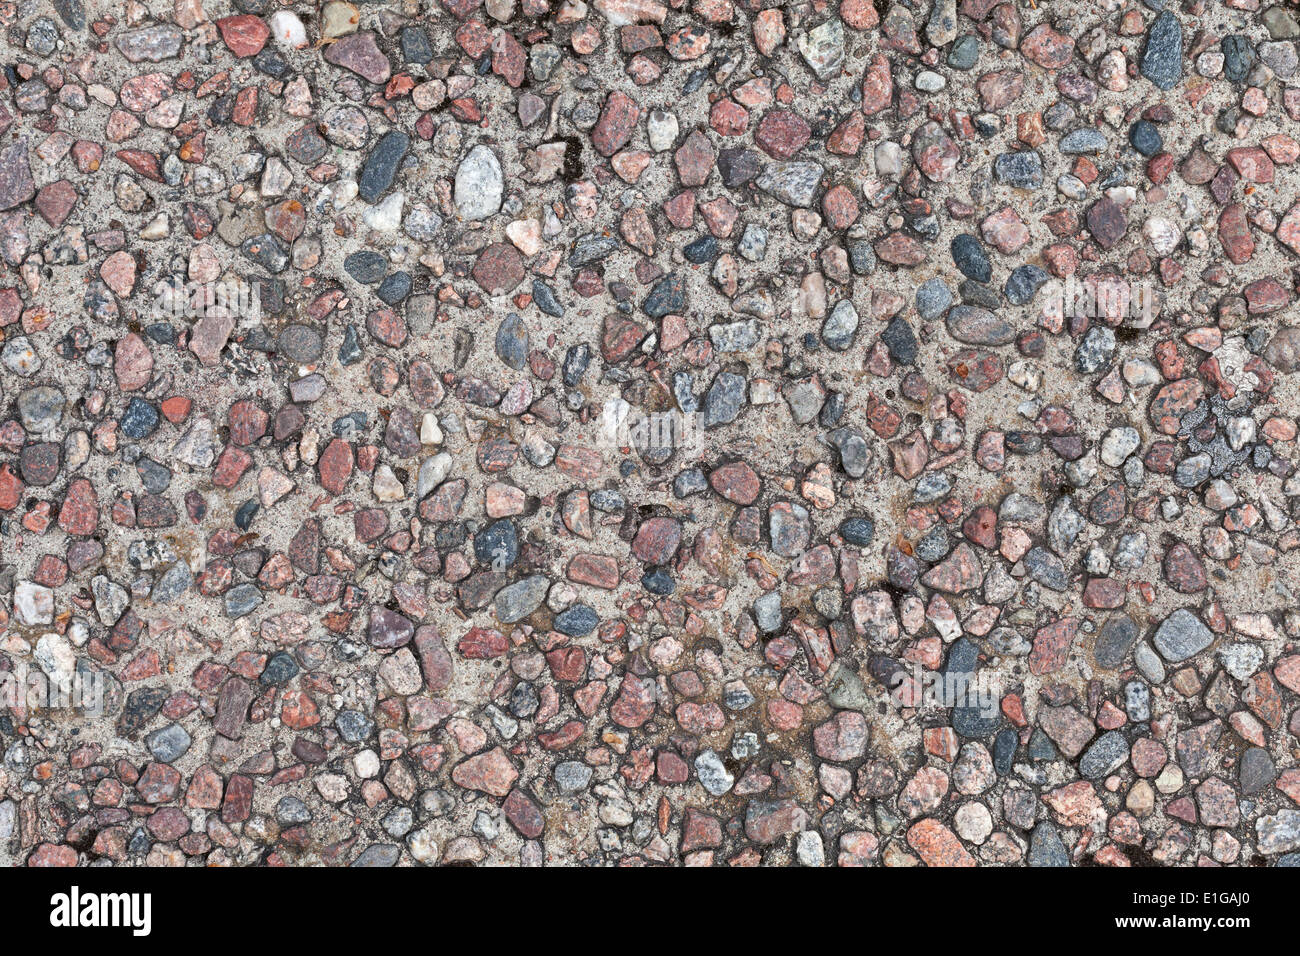 Background texture of concrete wall with colorful granite stones Stock Photo